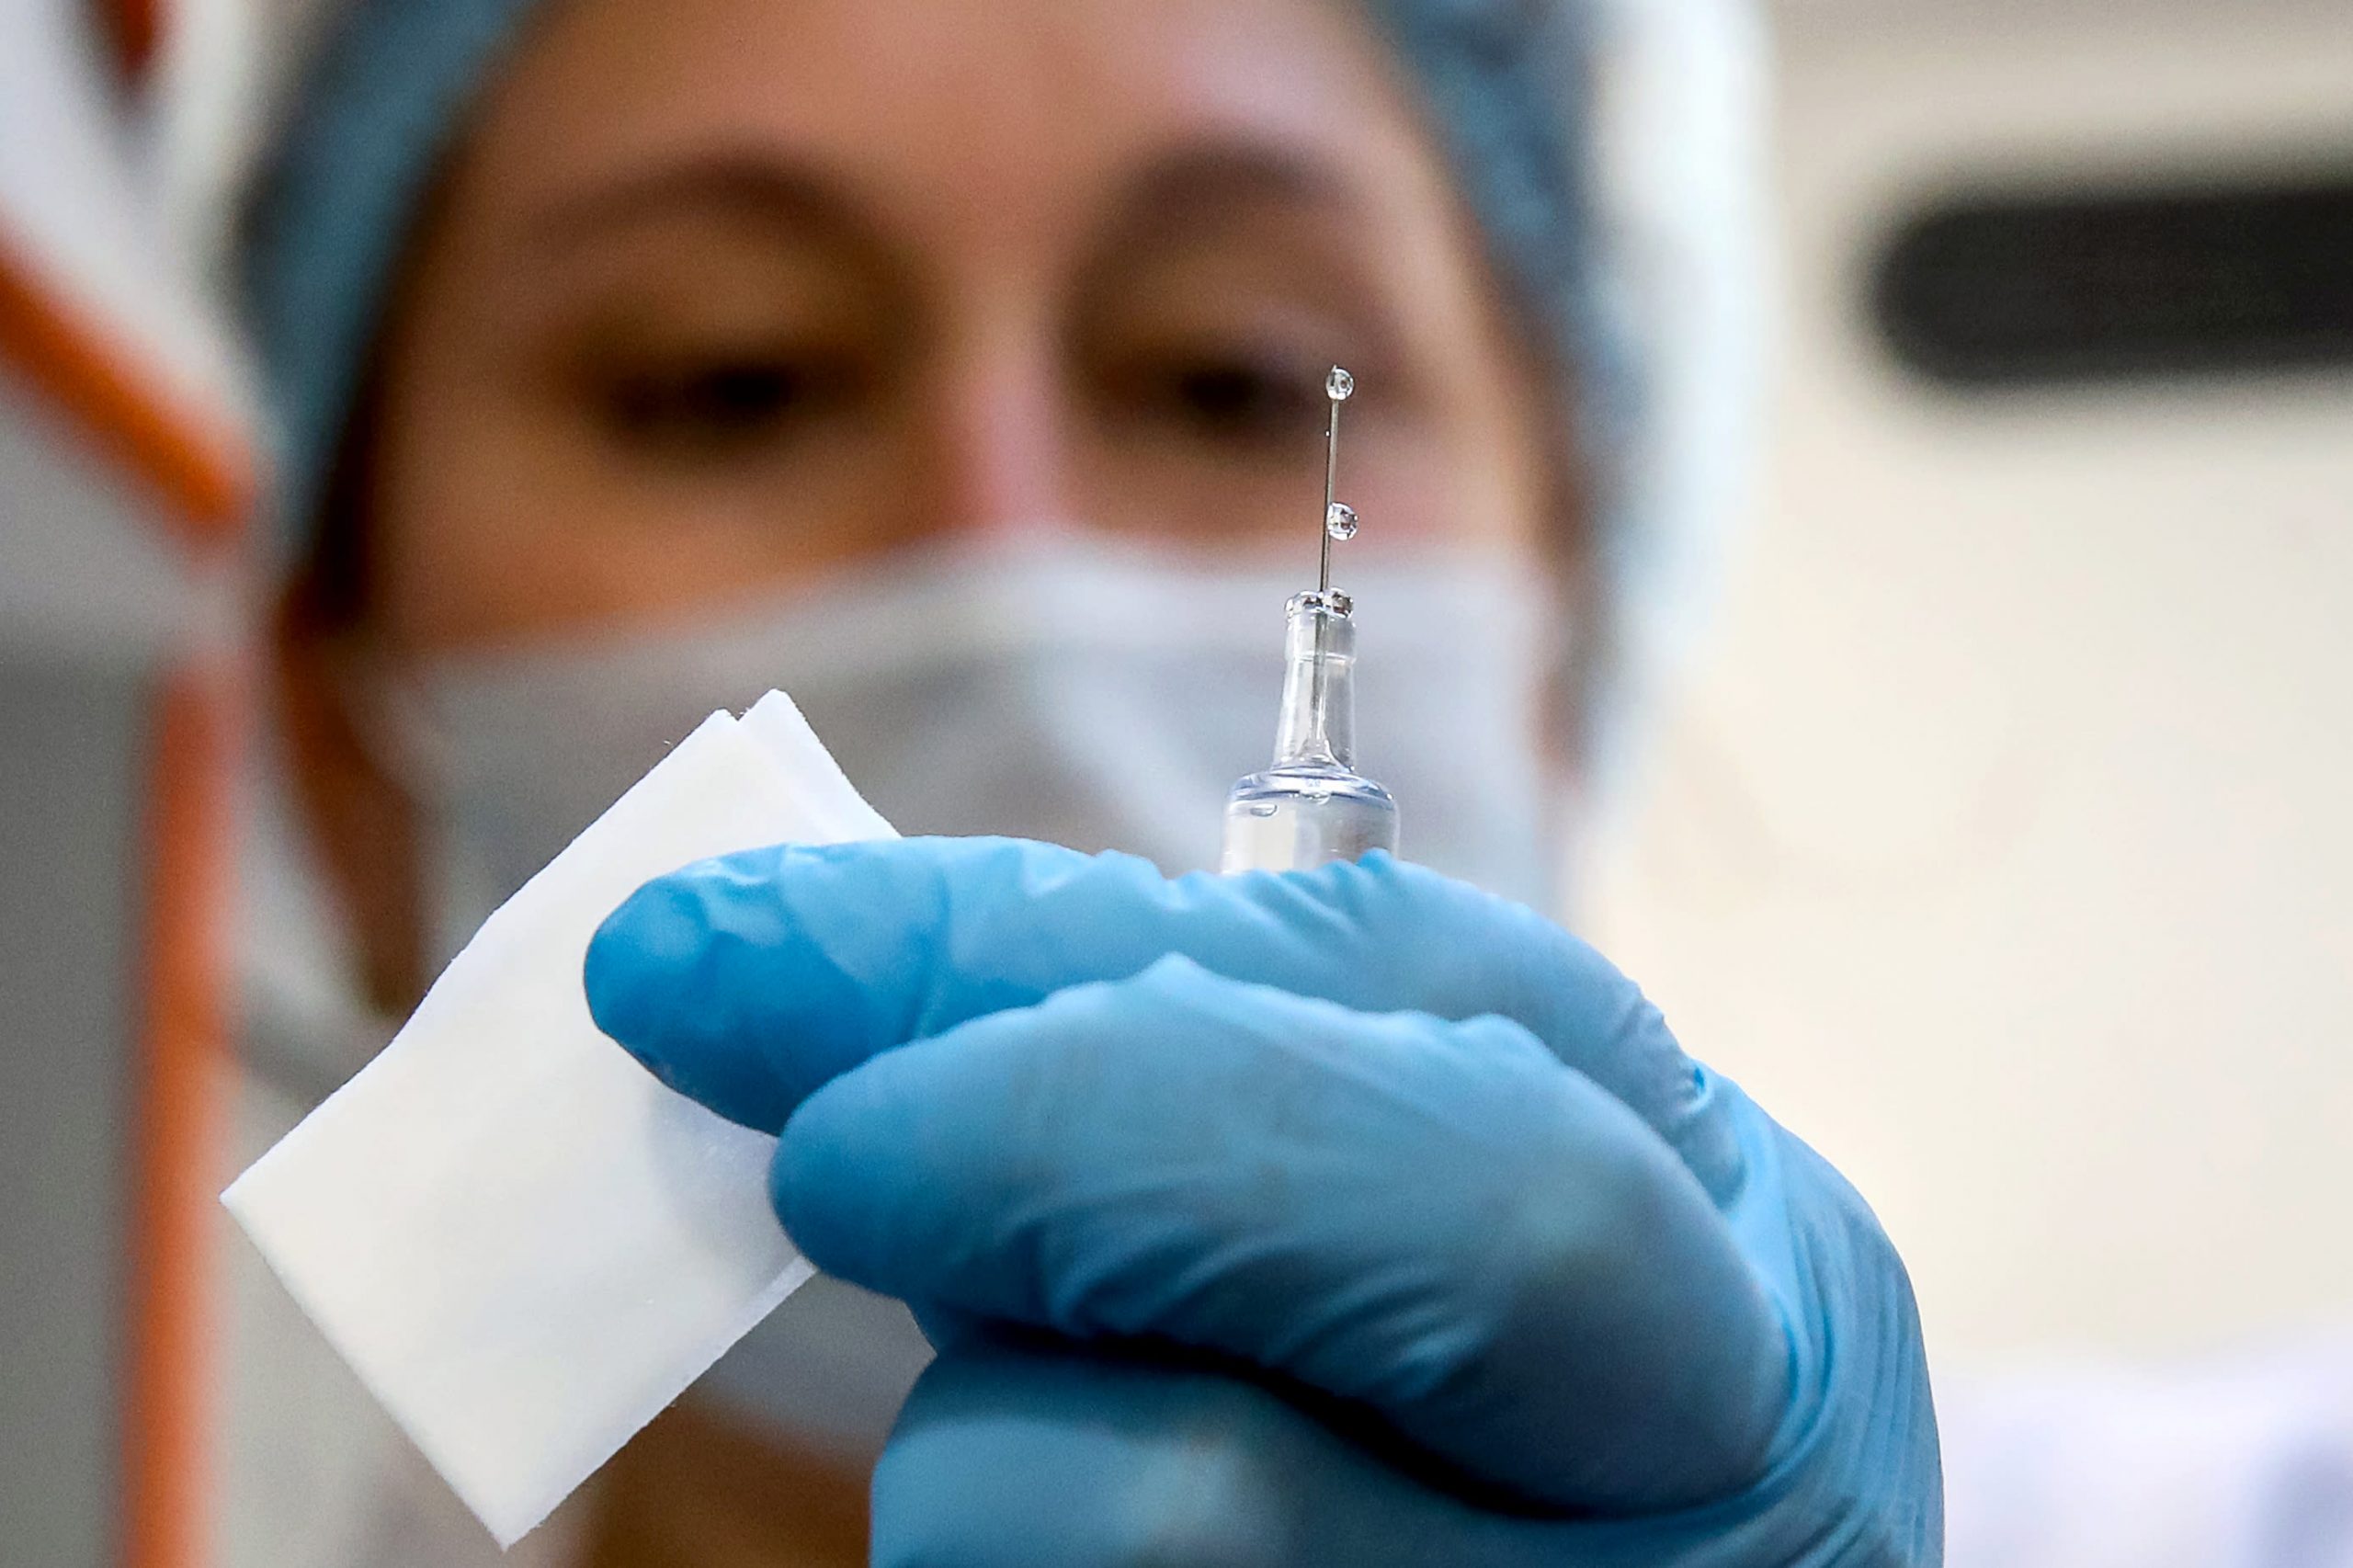 Russian corona virus vaccine shows no serious side effects: Lancet study